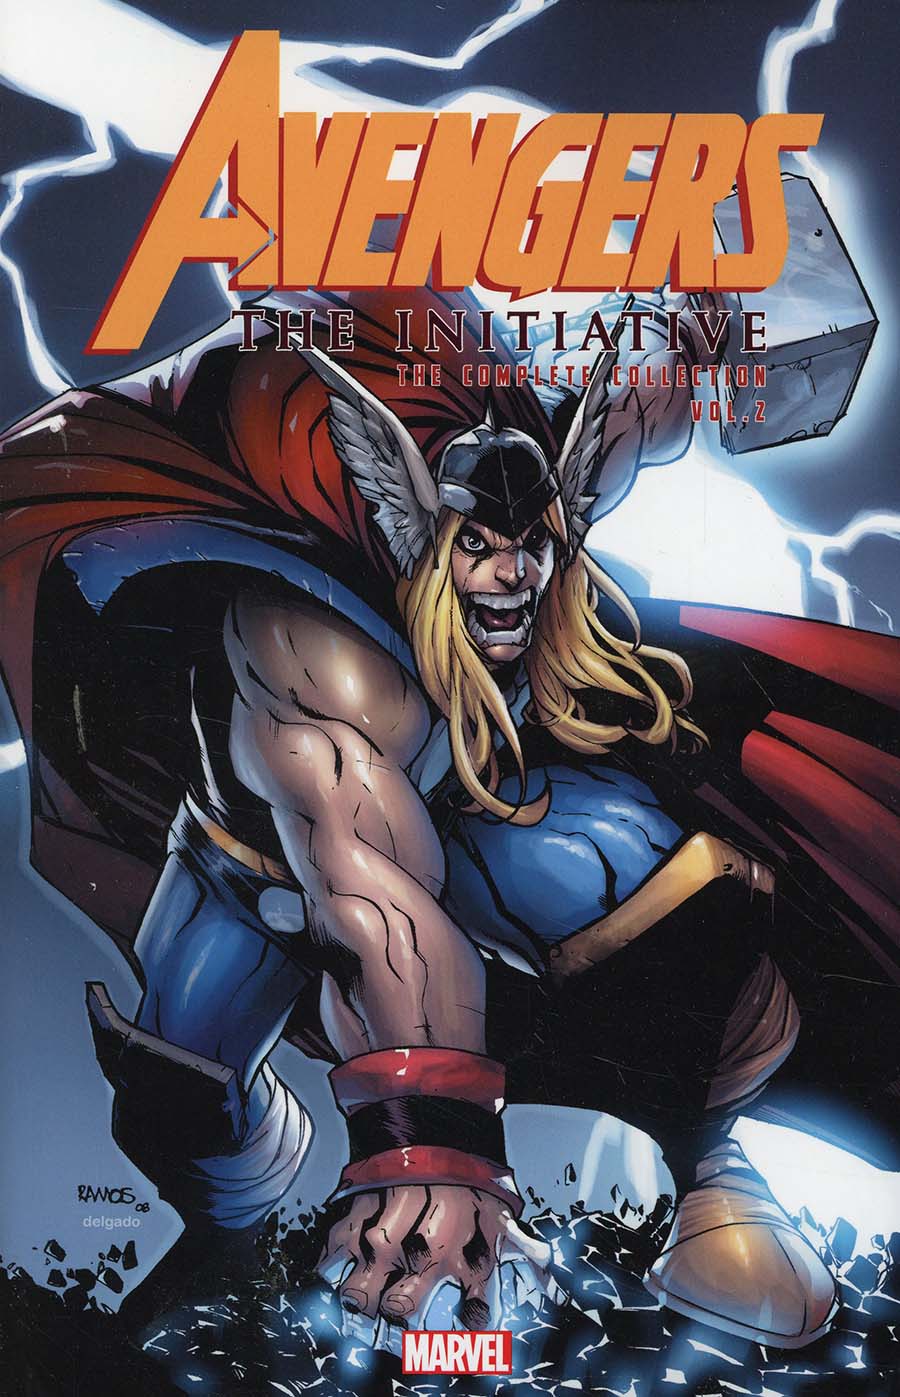 Avengers The Initiative Complete Collection Vol 2 TP